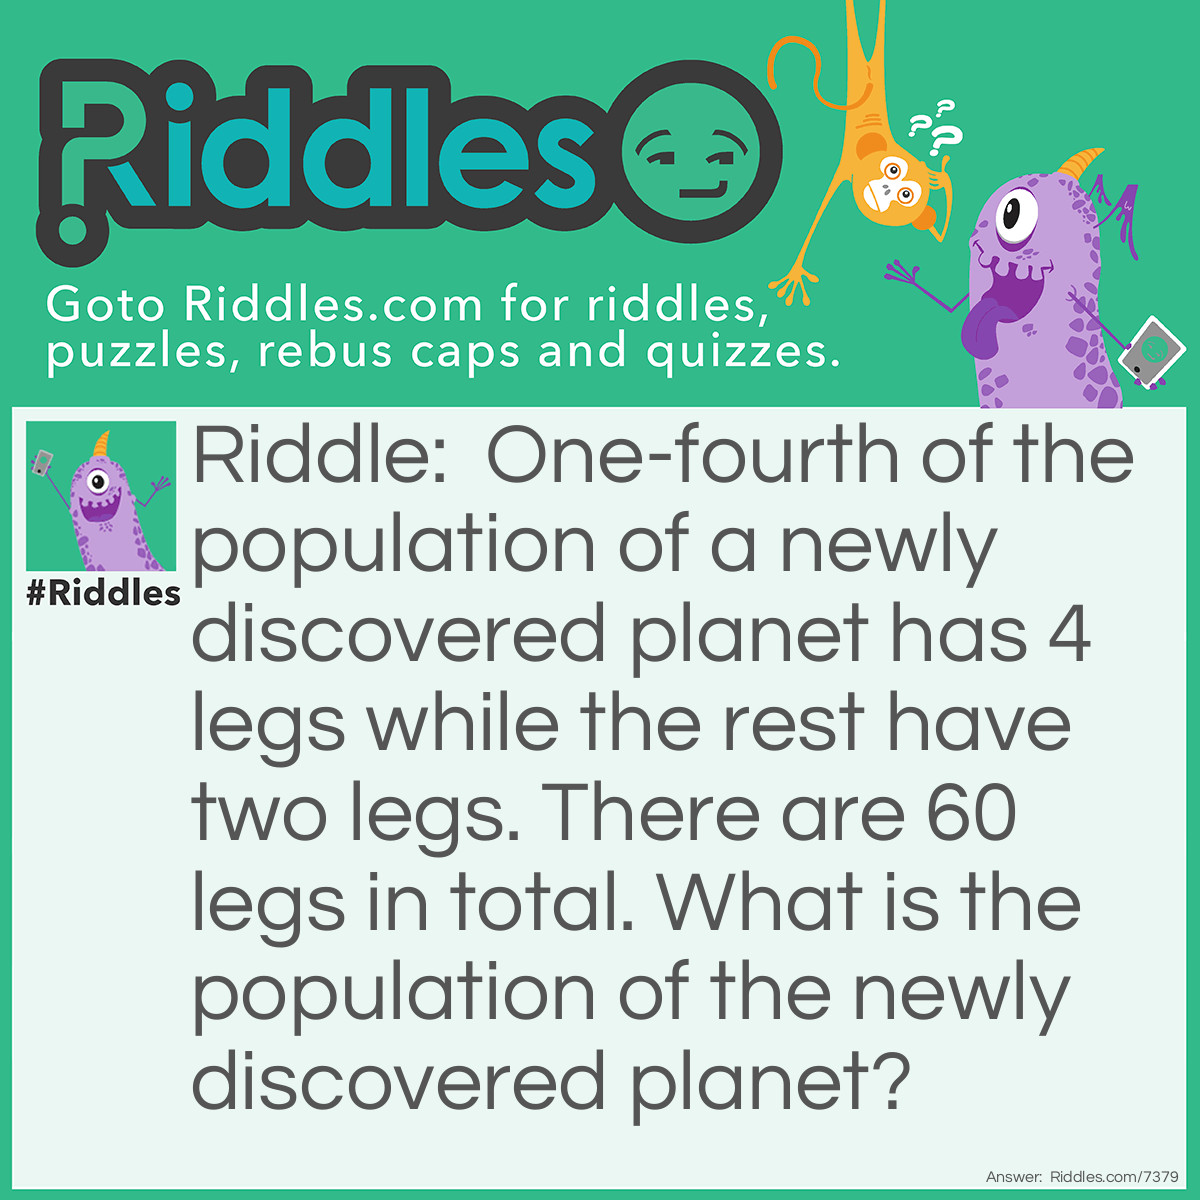 Riddle: One fourth of the population of a newly discovered planet have 4 legs. The rest have two legs. There are 60 legs total. How big is the population of the newly discovered planet? Answer: 24.